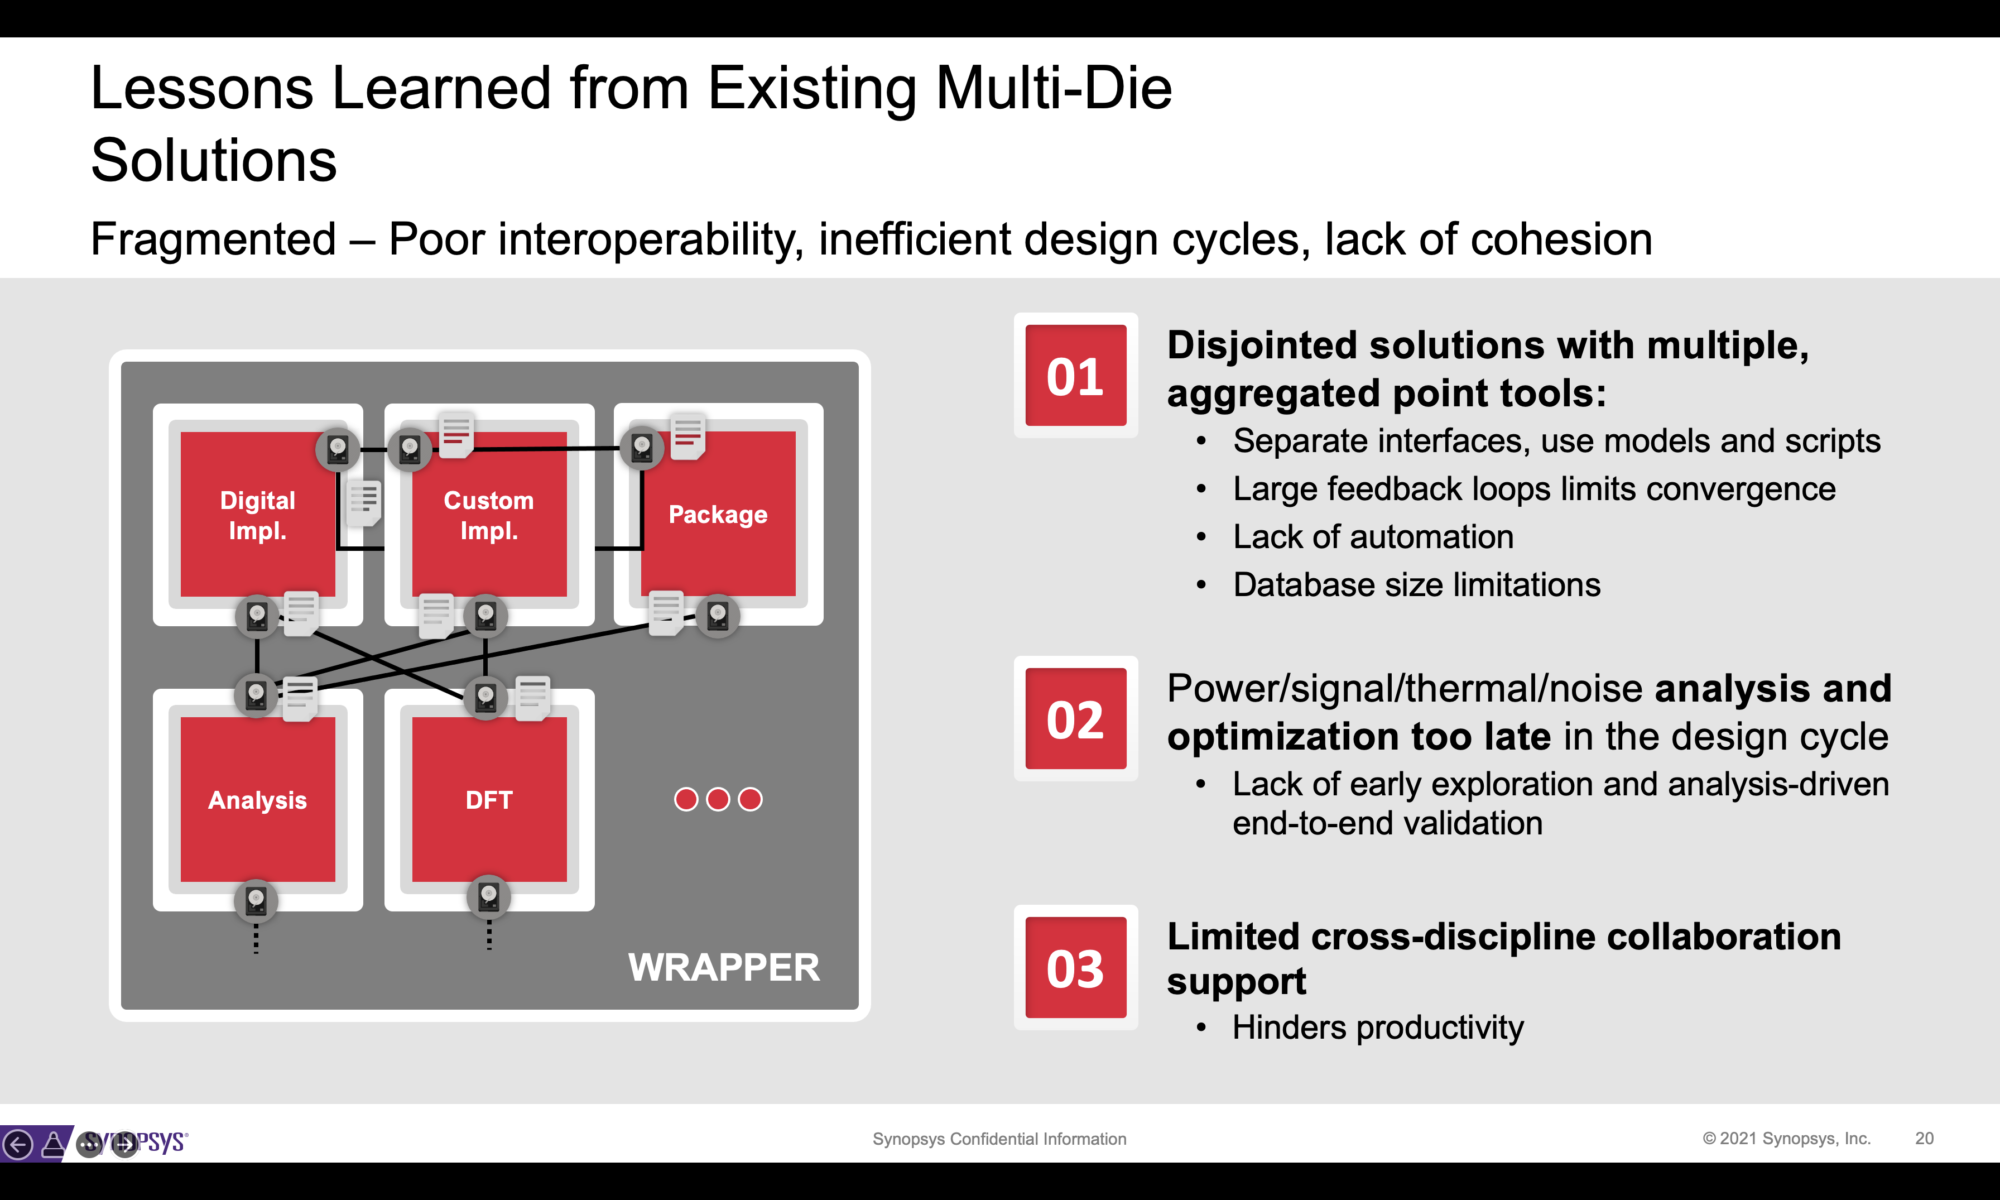 Lessons from Existing Multi Die Solutions